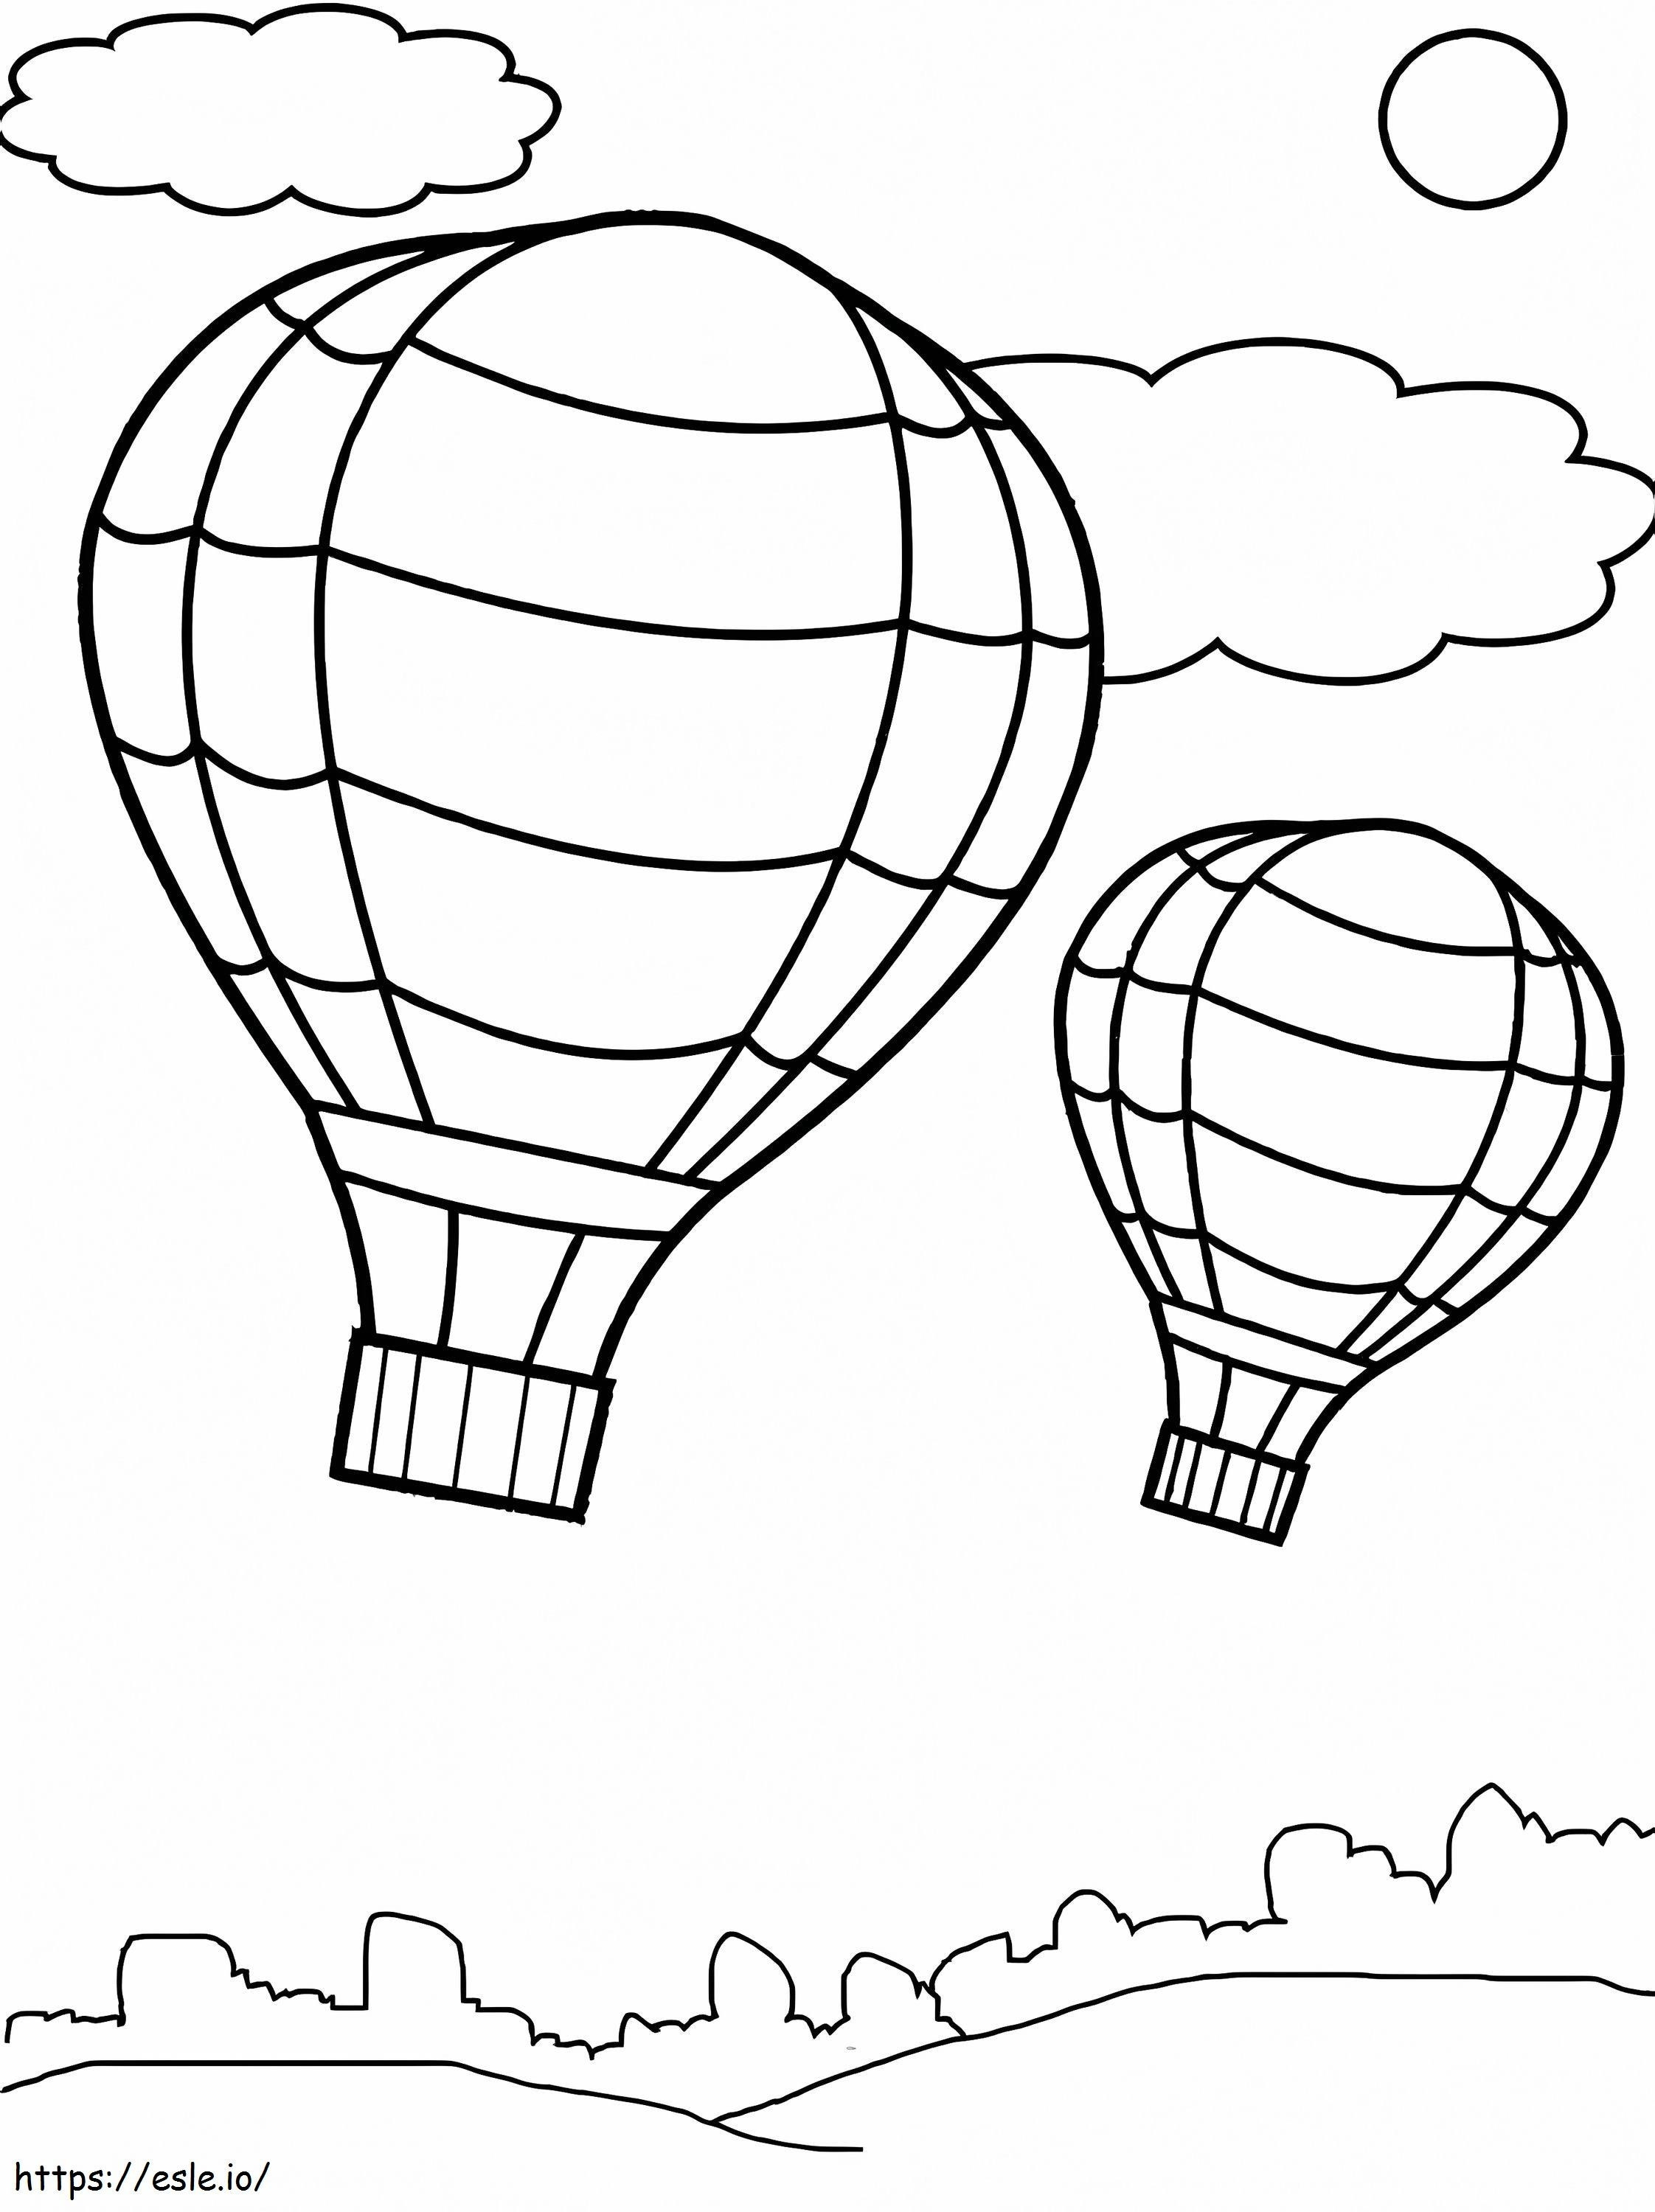 Two Good Hot Air Balloons coloring page